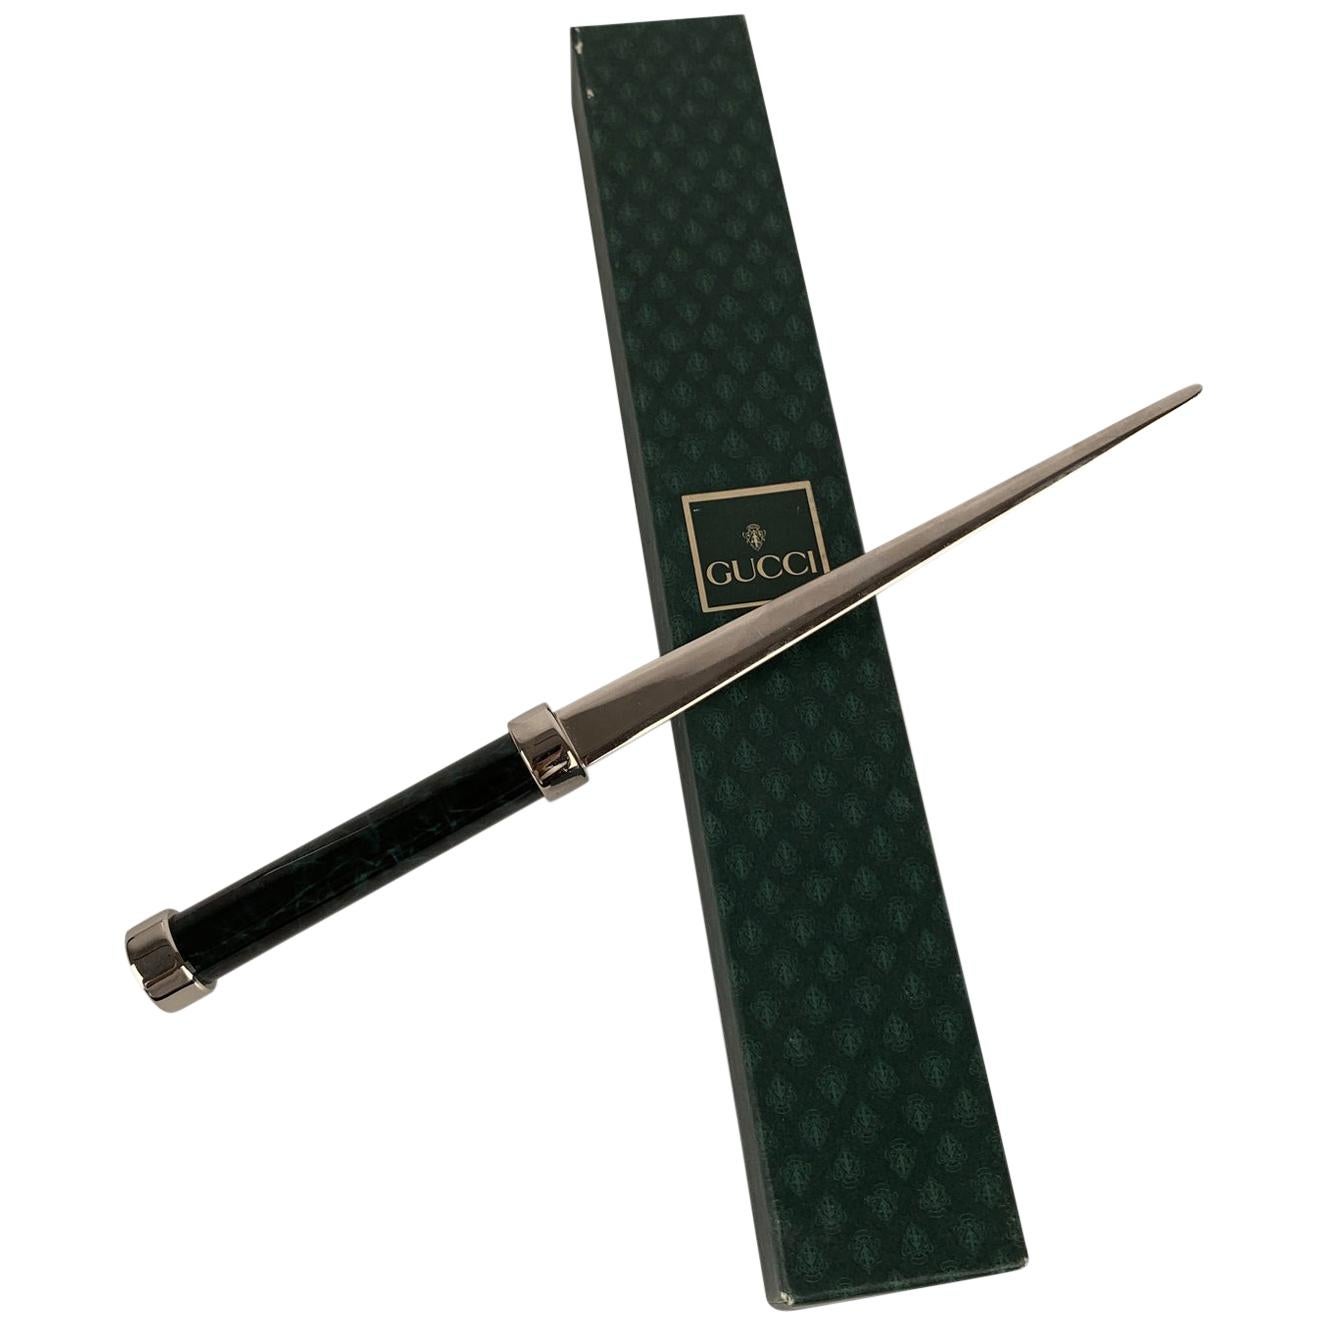 Gucci Vintage Silver Metal Letter Opener Green Marbled Handle with Box